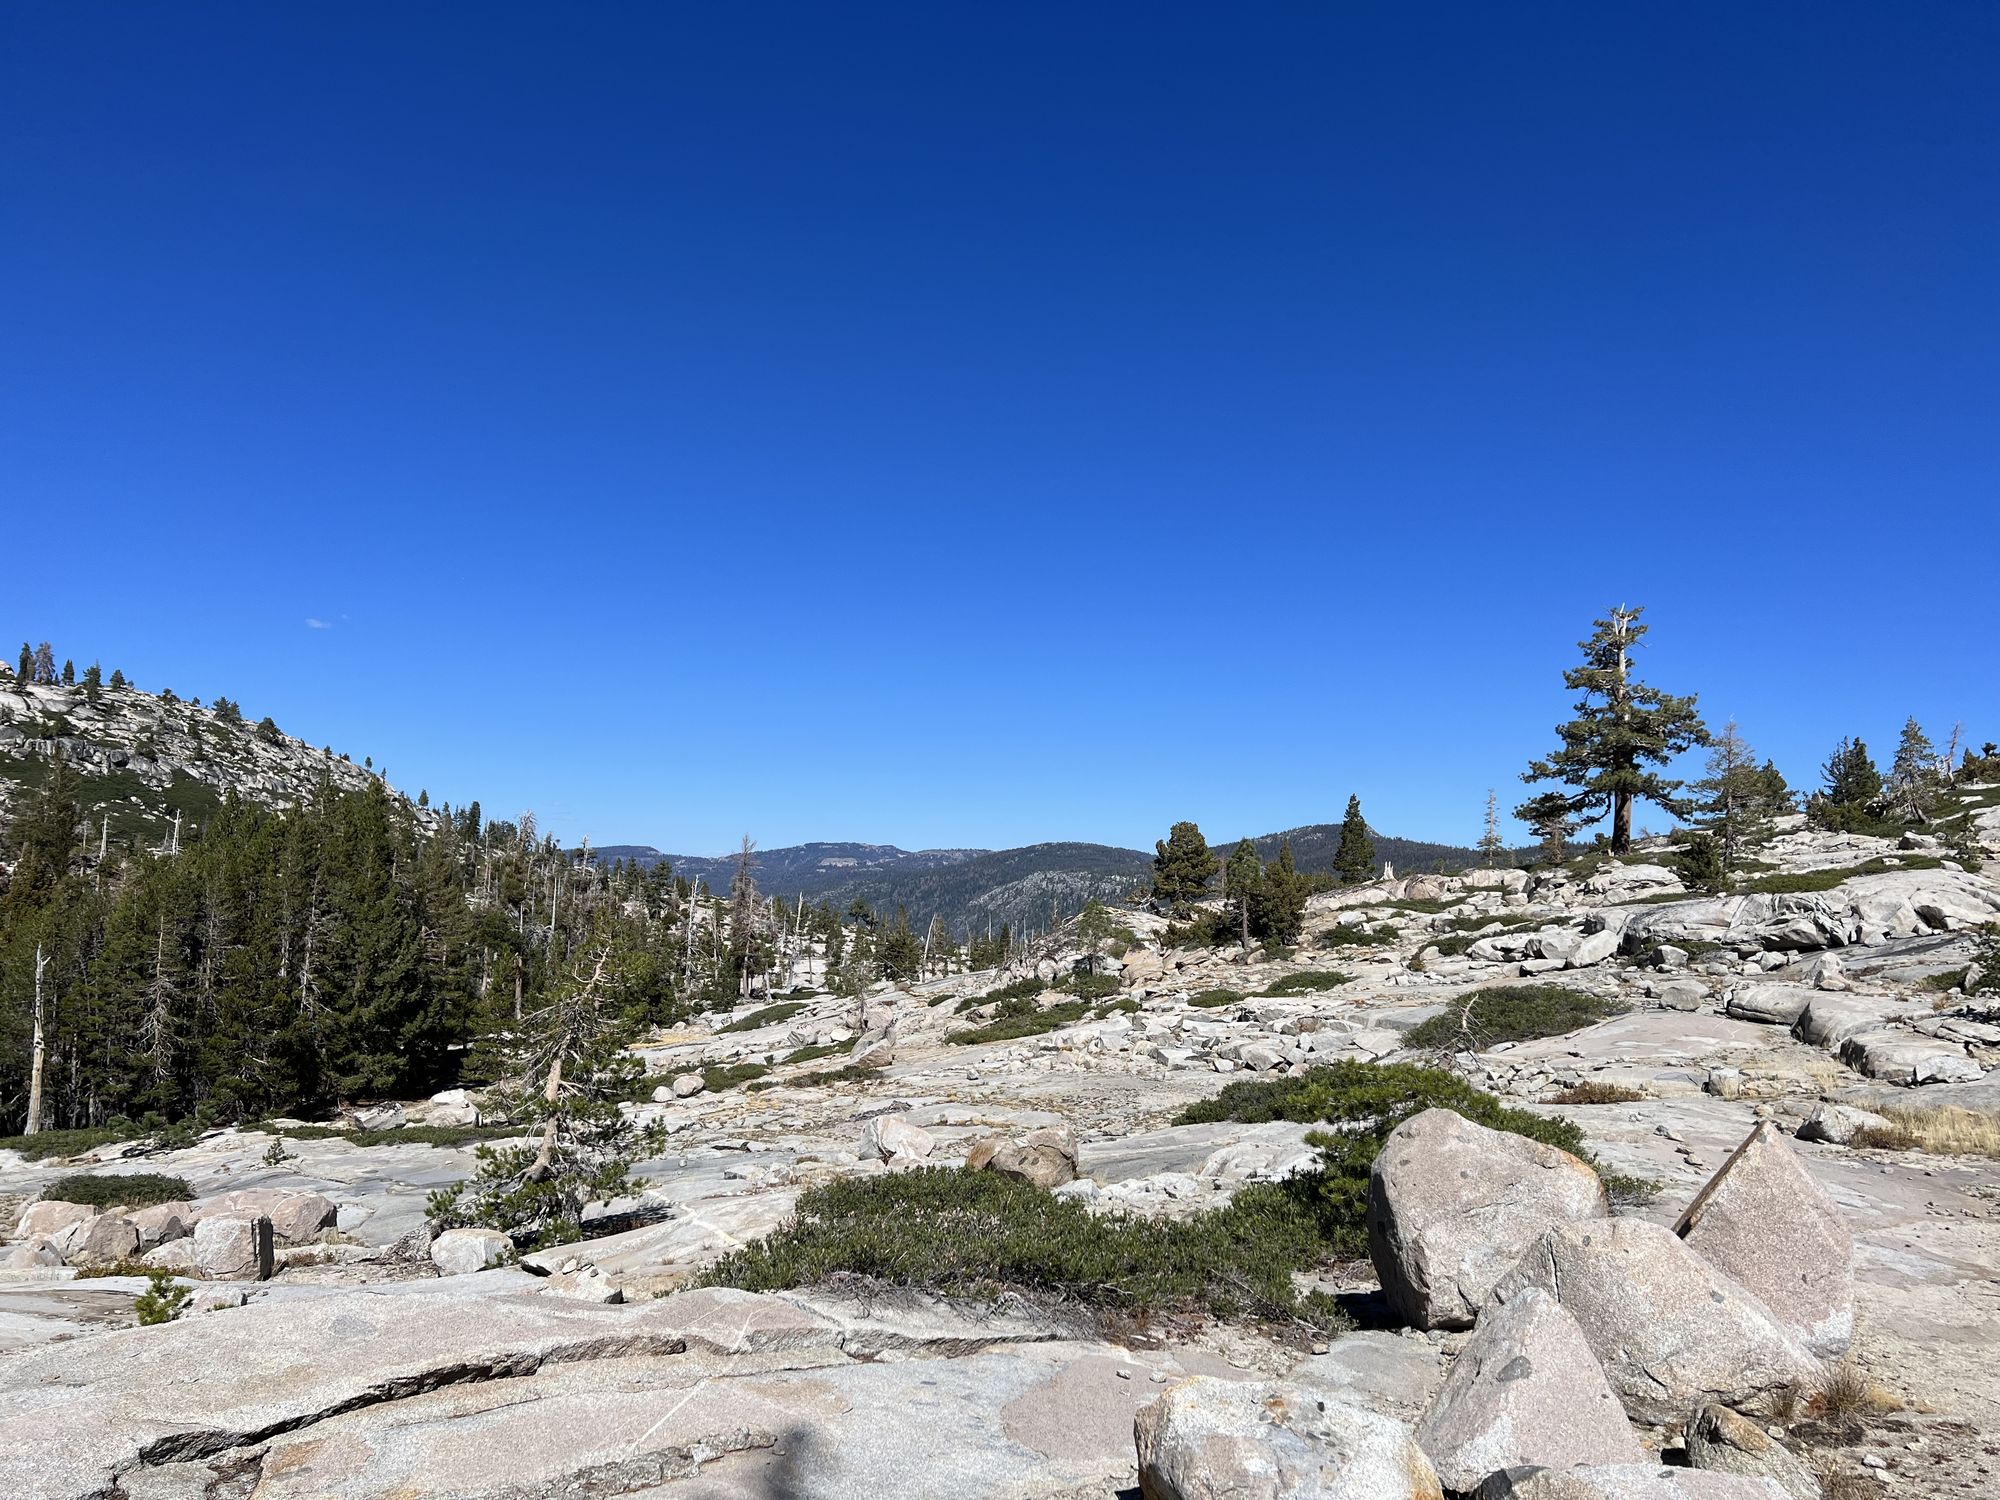 An open view over granite with big boulders.